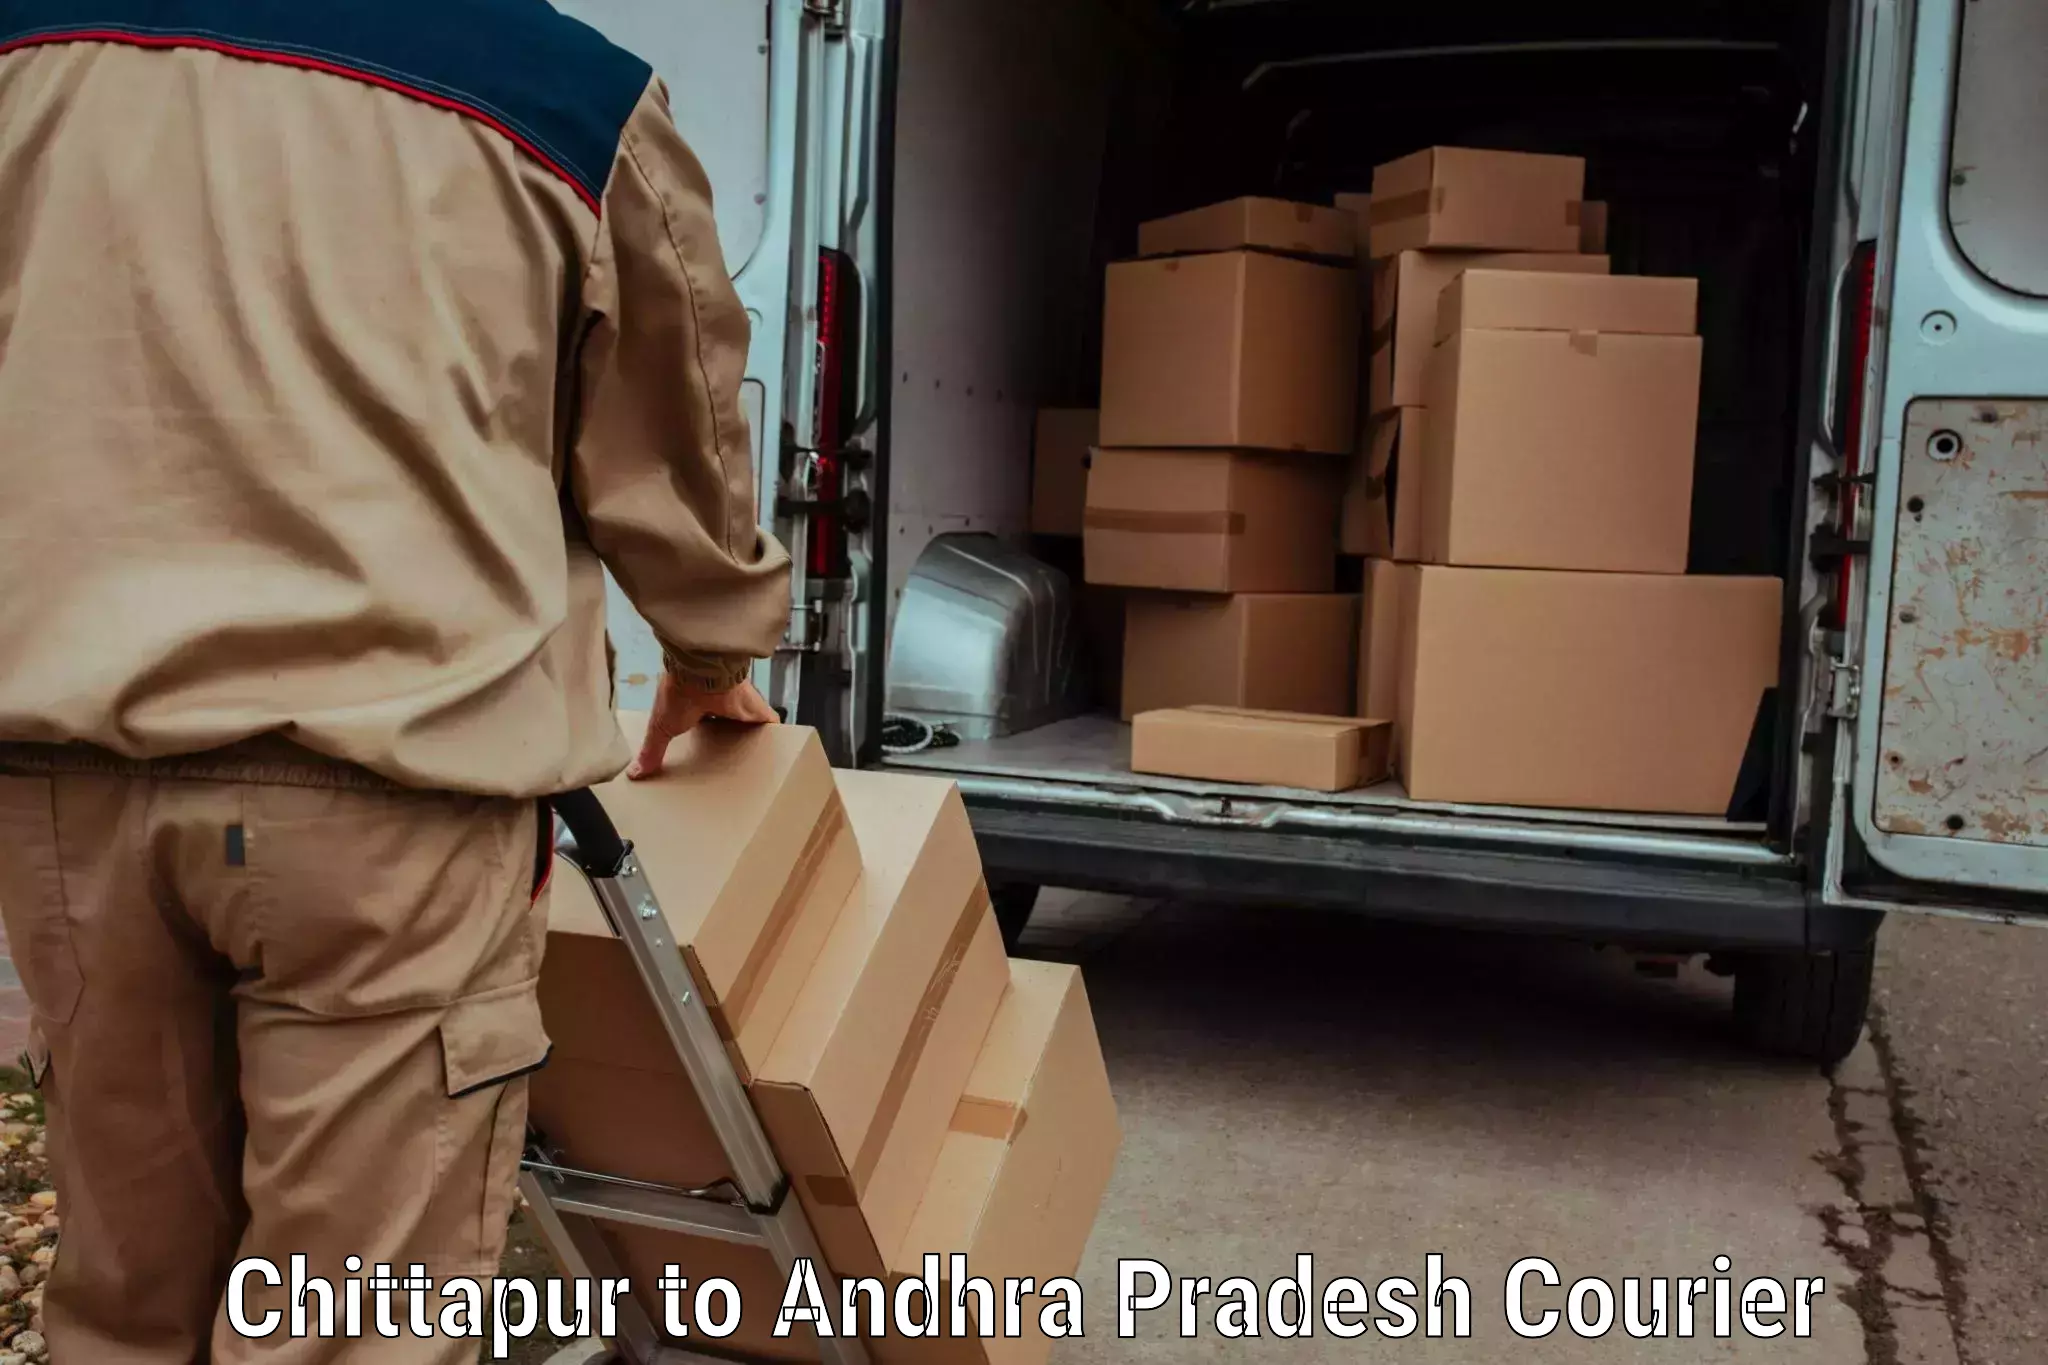 Business delivery service Chittapur to Visakhapatnam